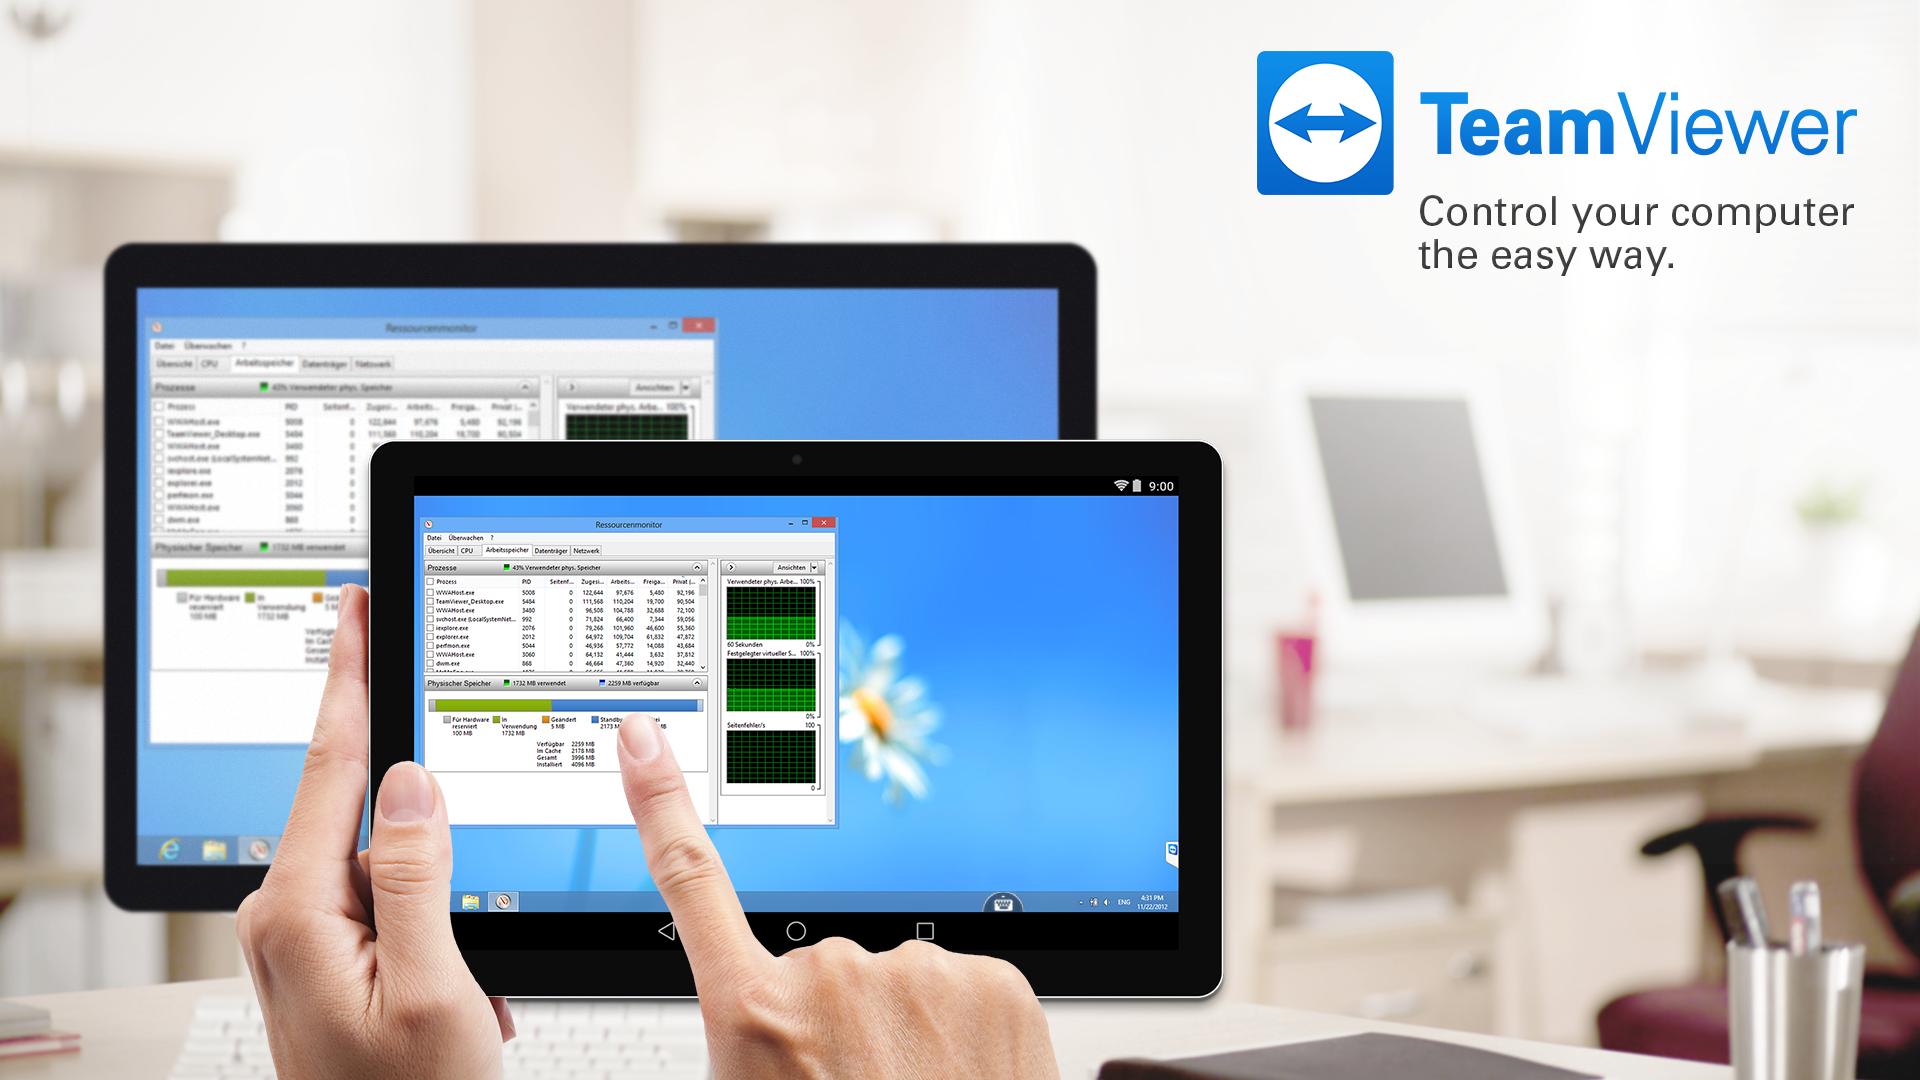 TeamViewer for Remote Control 15.12.12 Screenshot 13